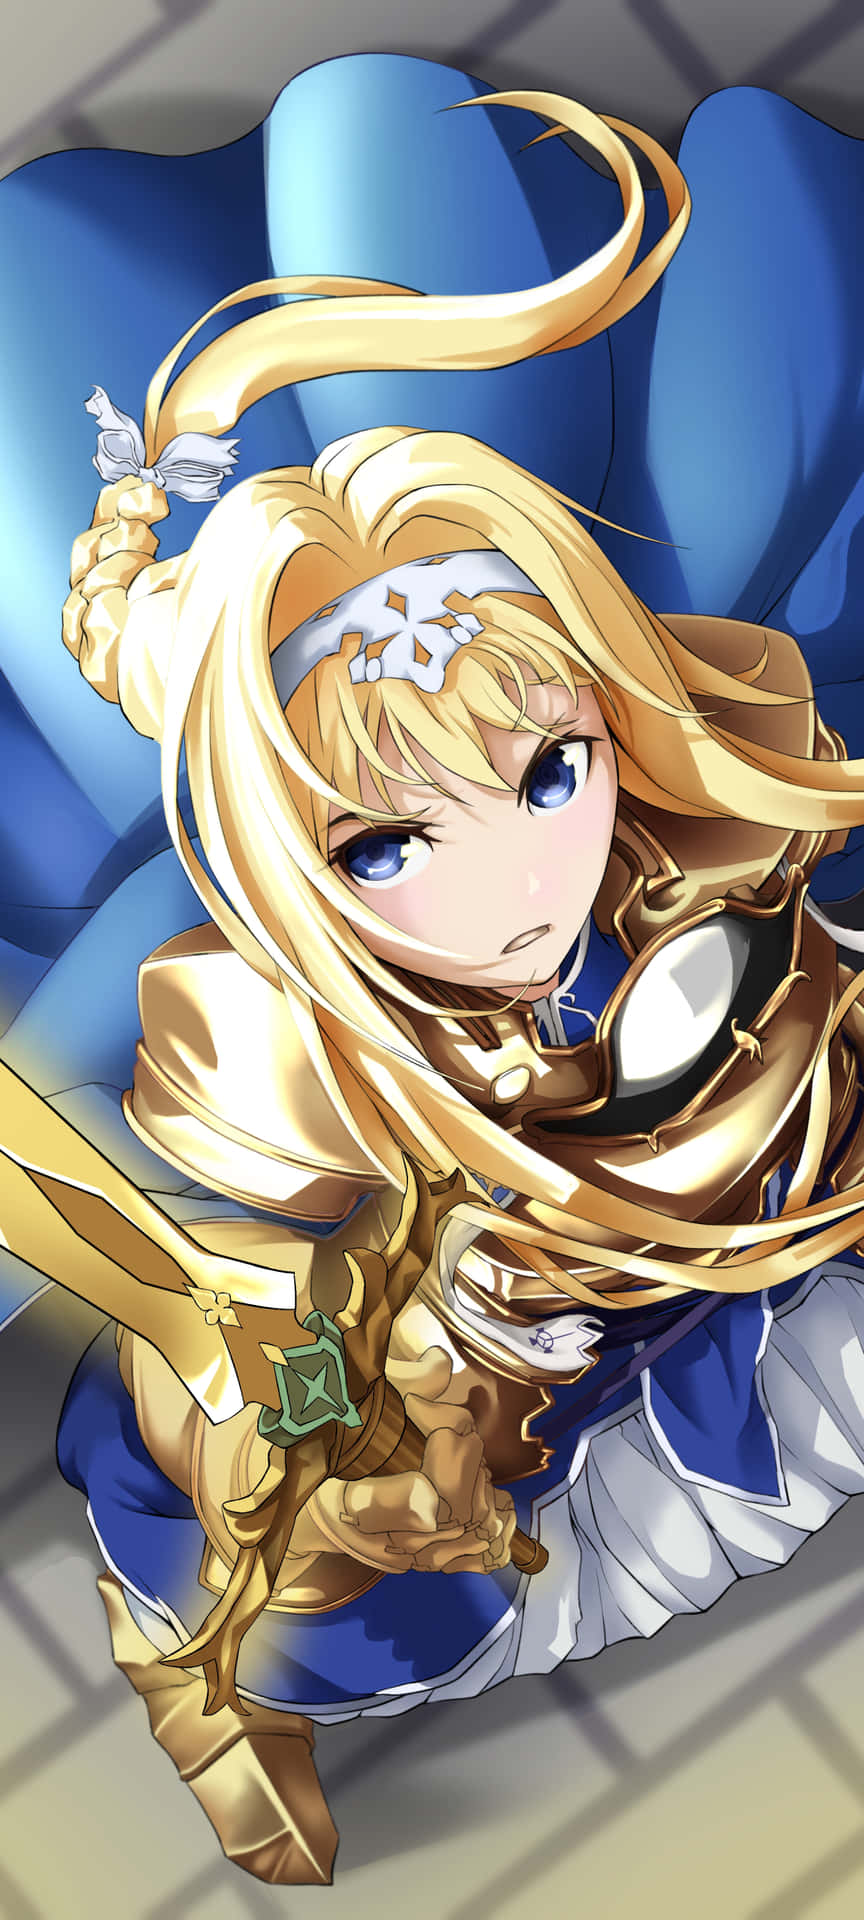 A Girl With Long Blonde Hair And Blue Armor Wallpaper